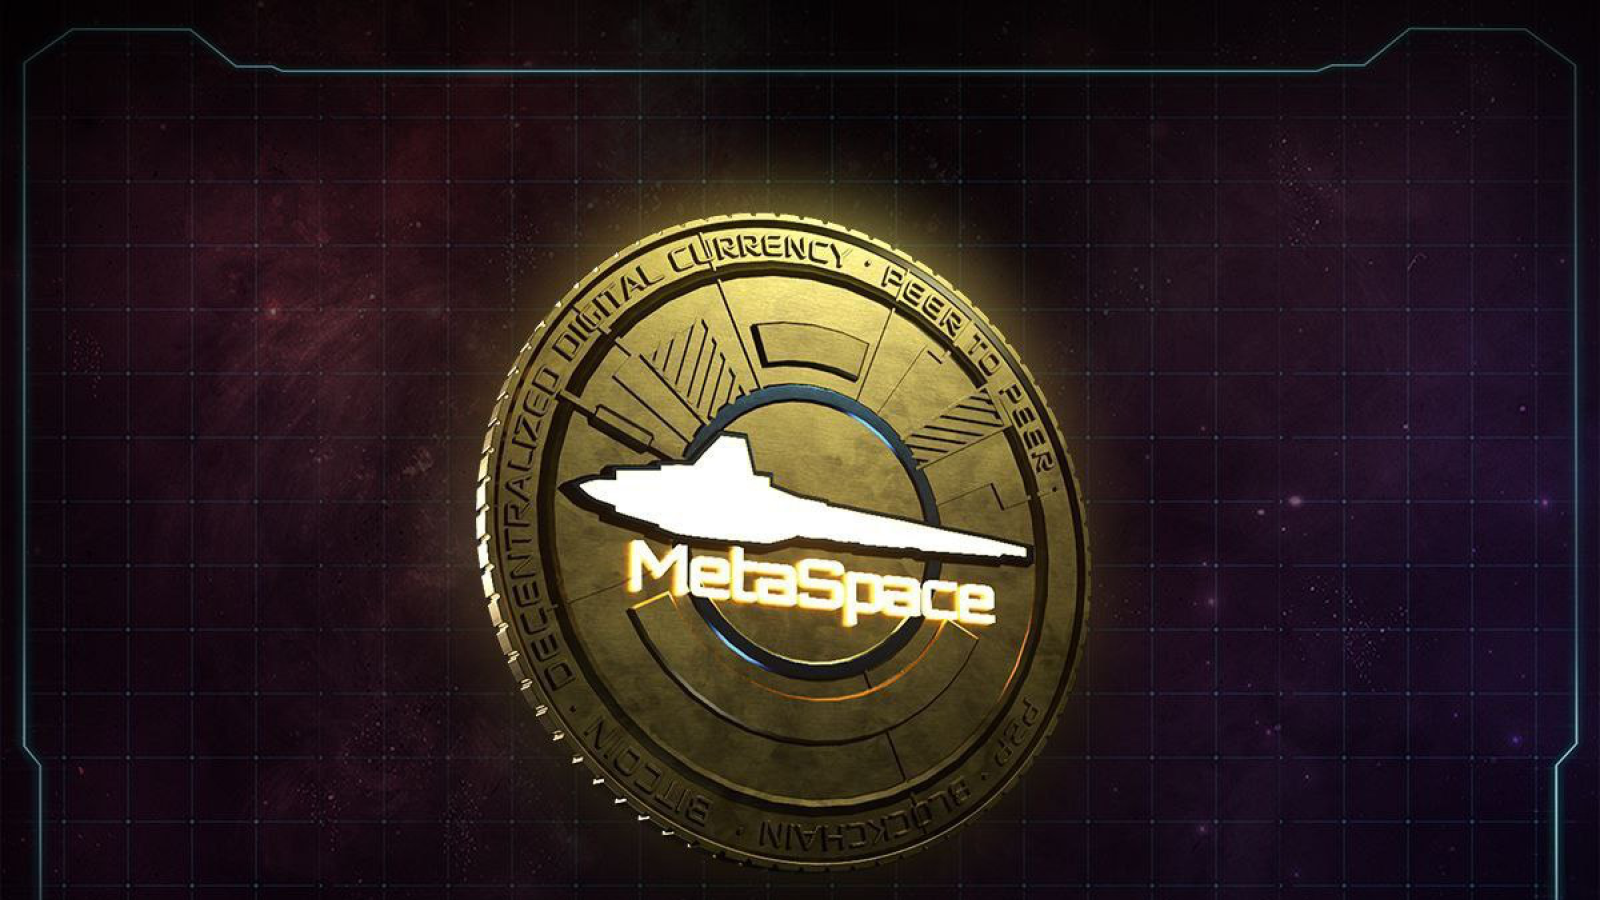 MetaSpace Making Waves Through NFT Space and Time